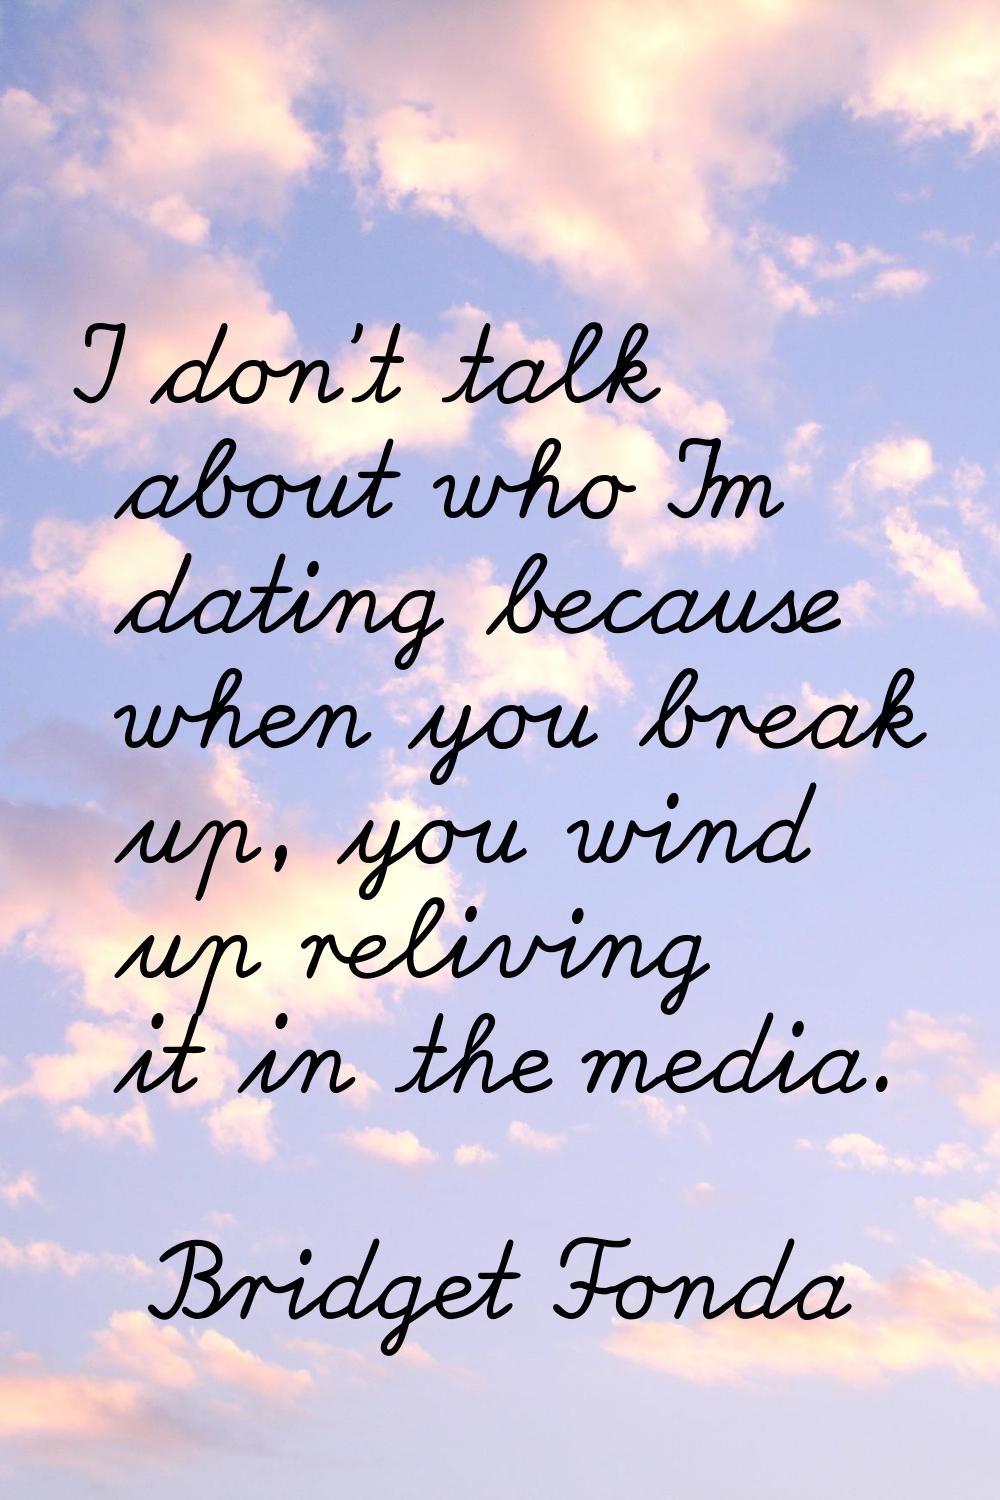 I don't talk about who I'm dating because when you break up, you wind up reliving it in the media.